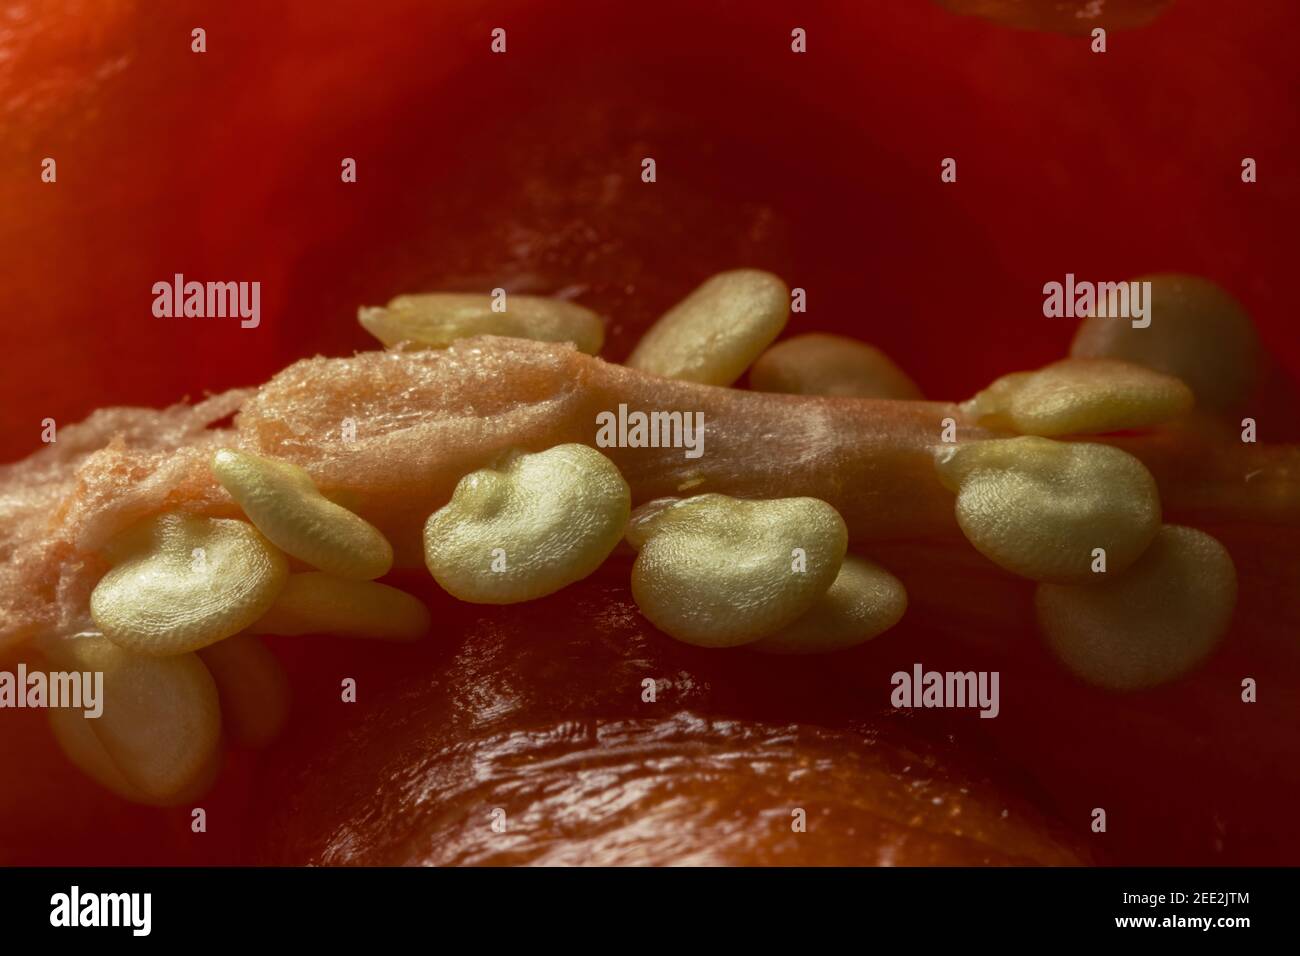 Inside of red pepper (chilli) with seeds Stock Photo